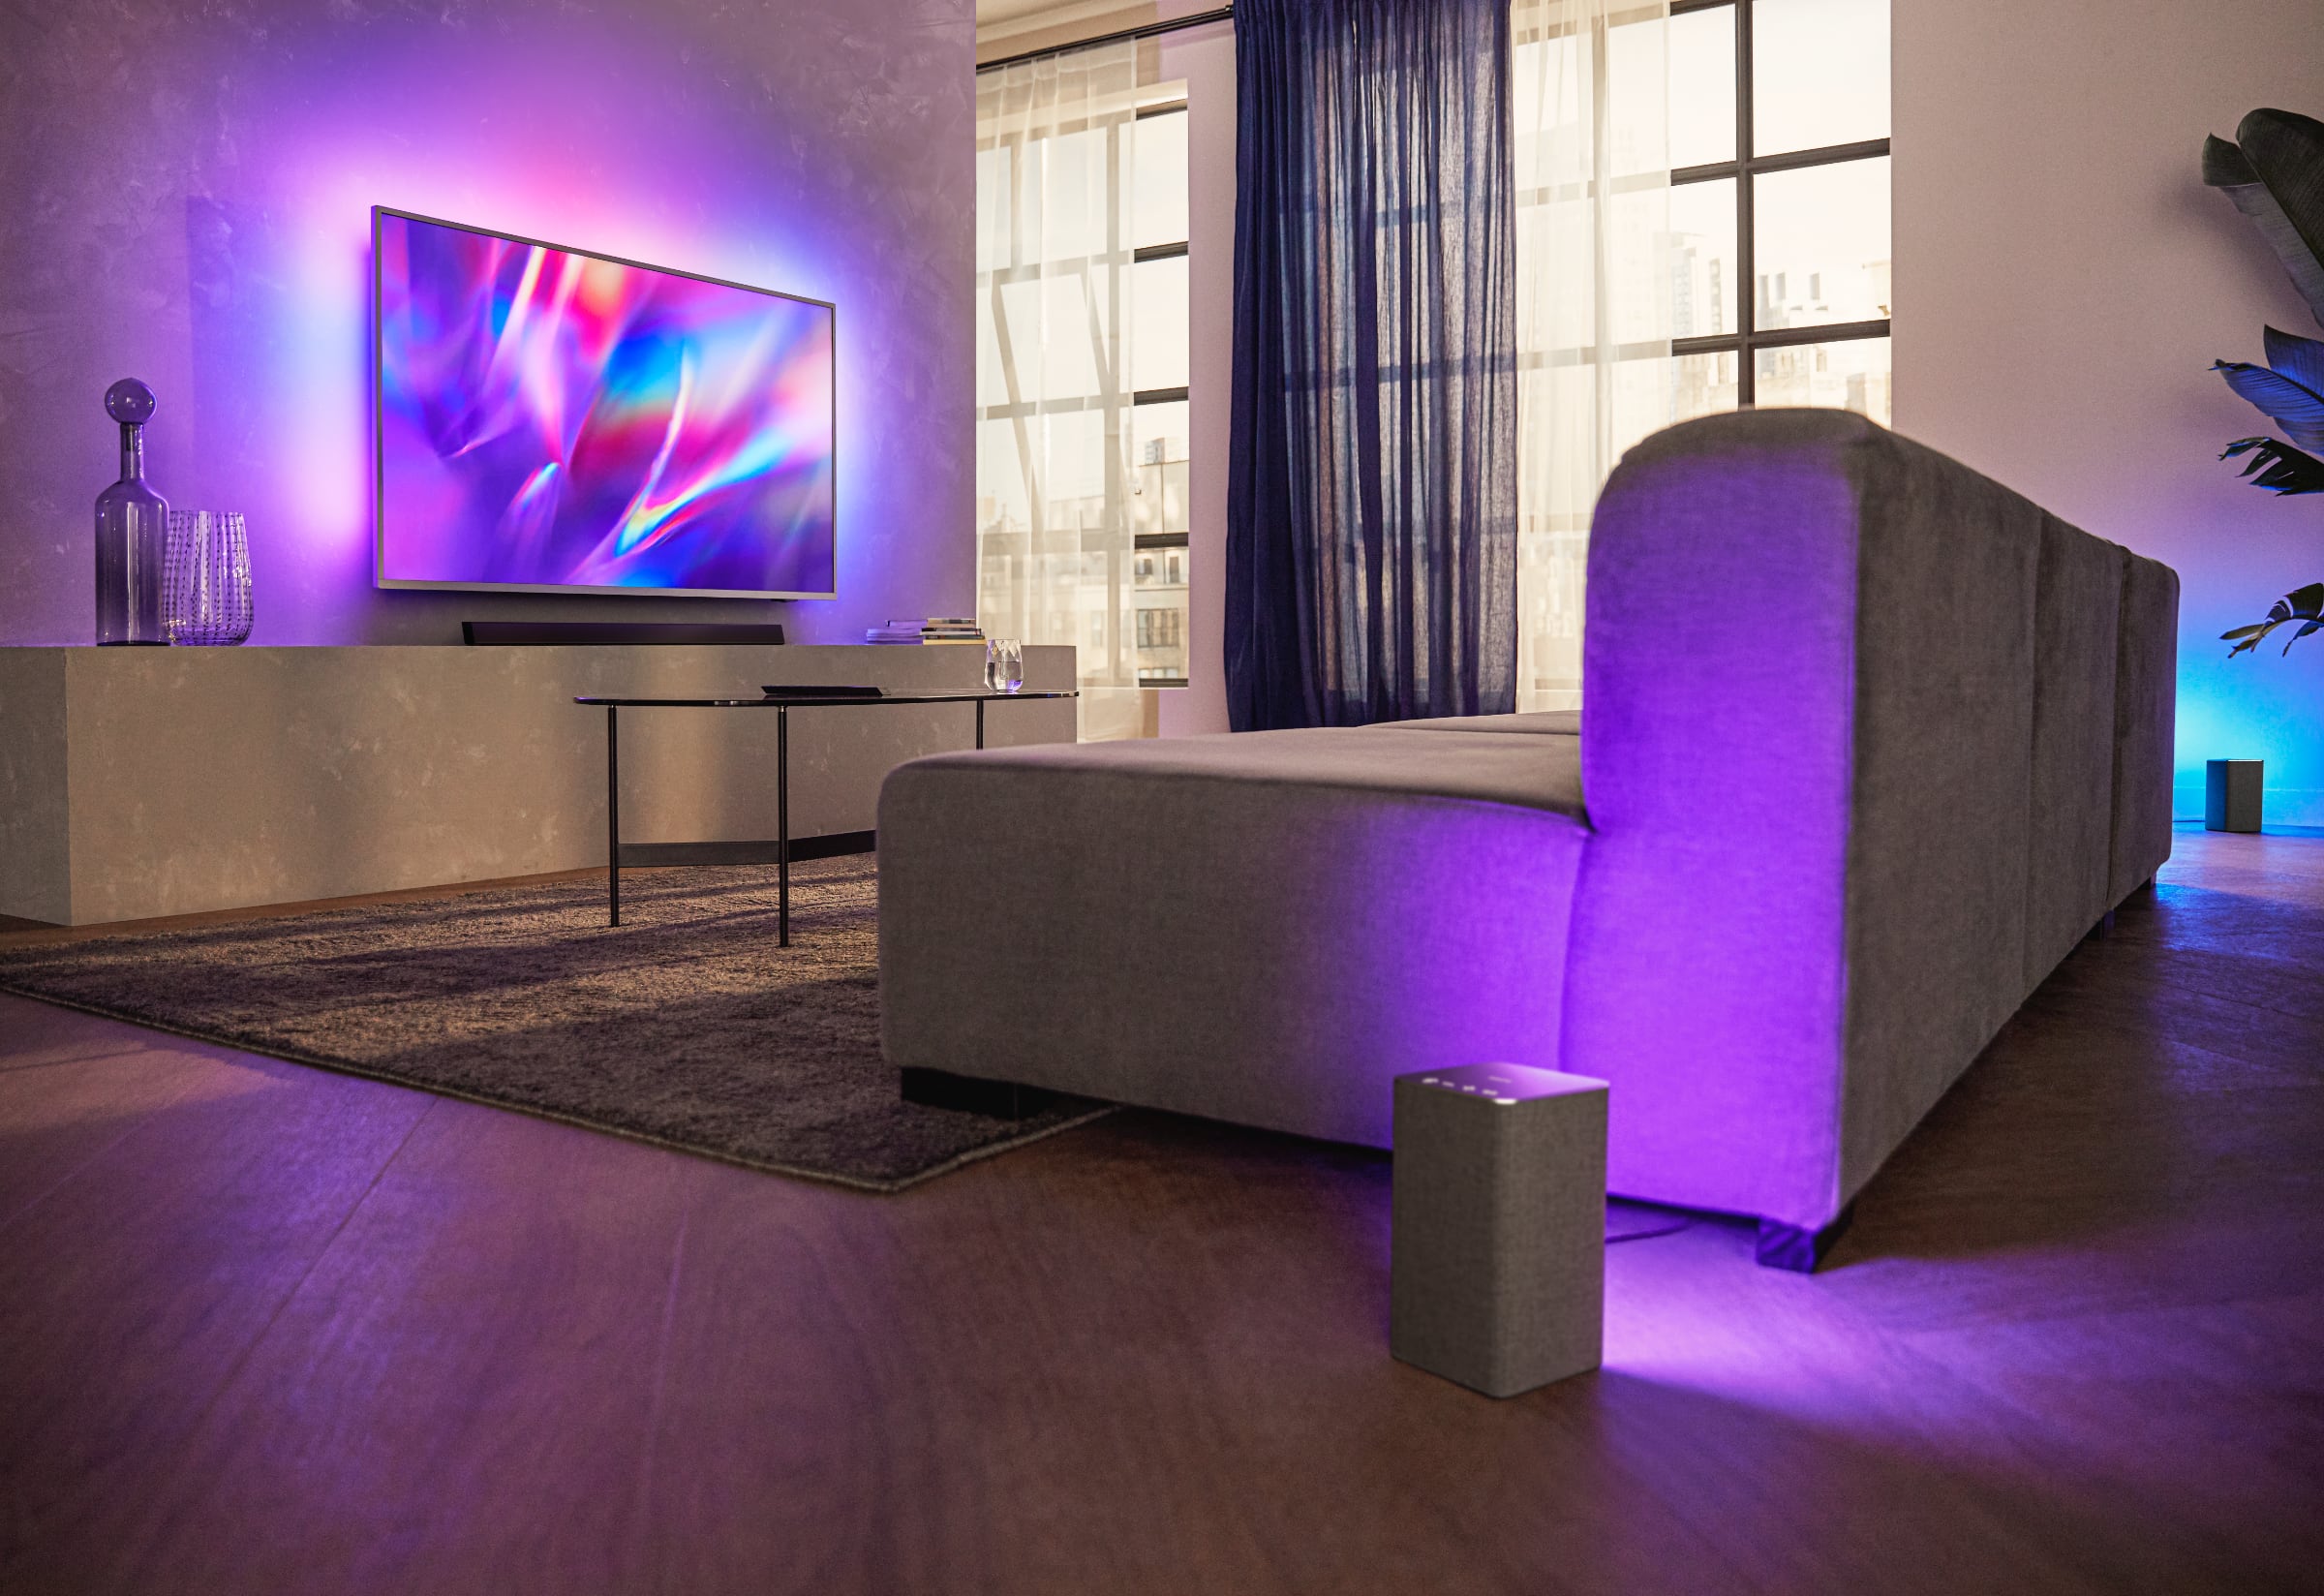 New Philips soundbars with Atmos, DTS Play-Fi – and Ambilight speakers - FlatpanelsHD